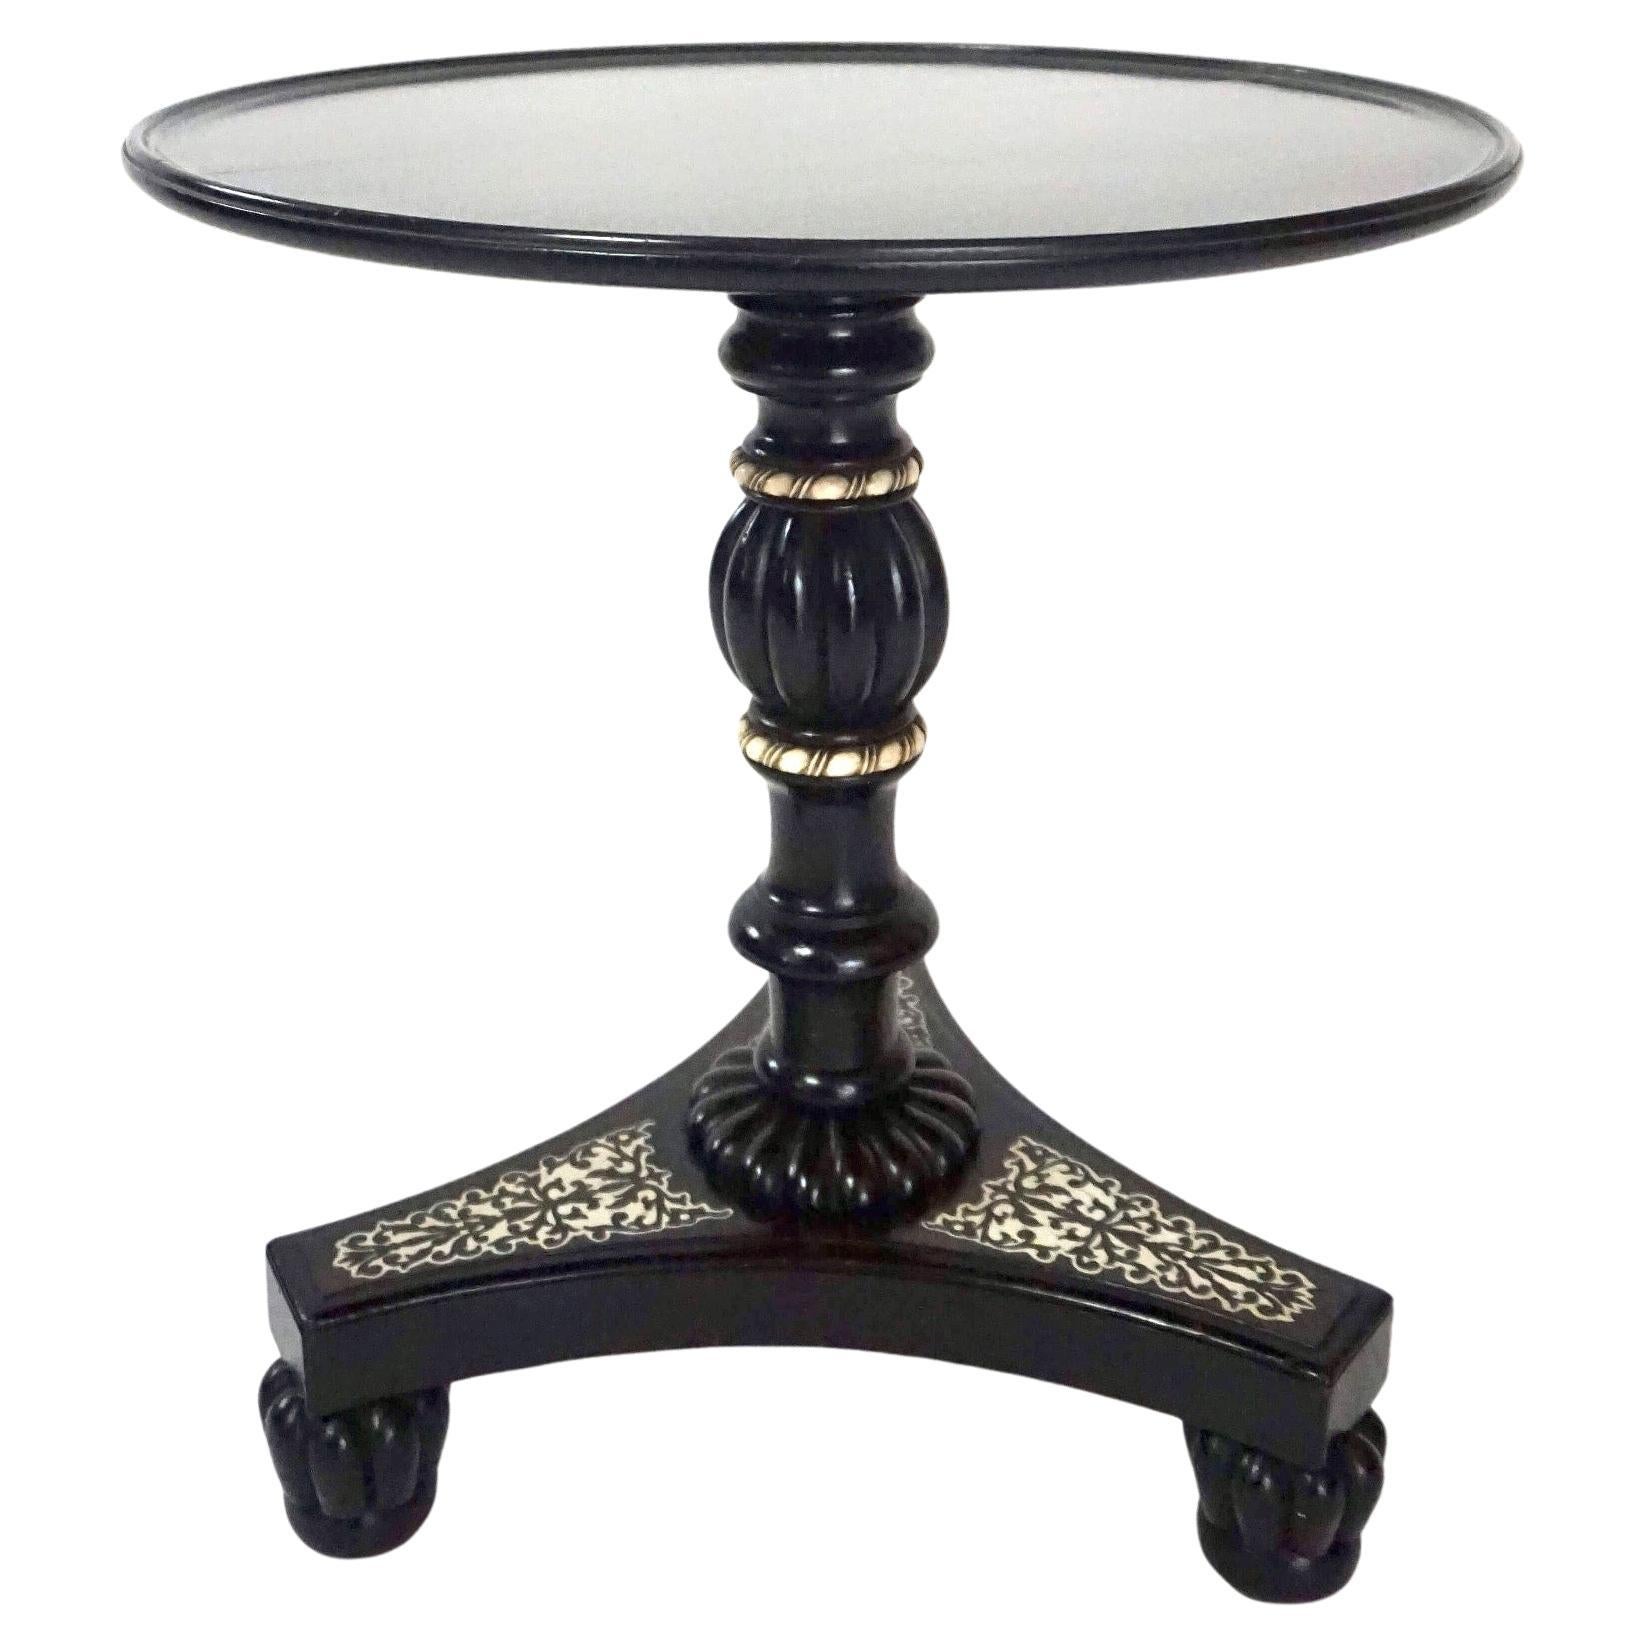 Anglo-Indian Bone Inlaid Ebony Petite Occasional Table or Stand, circa 1840